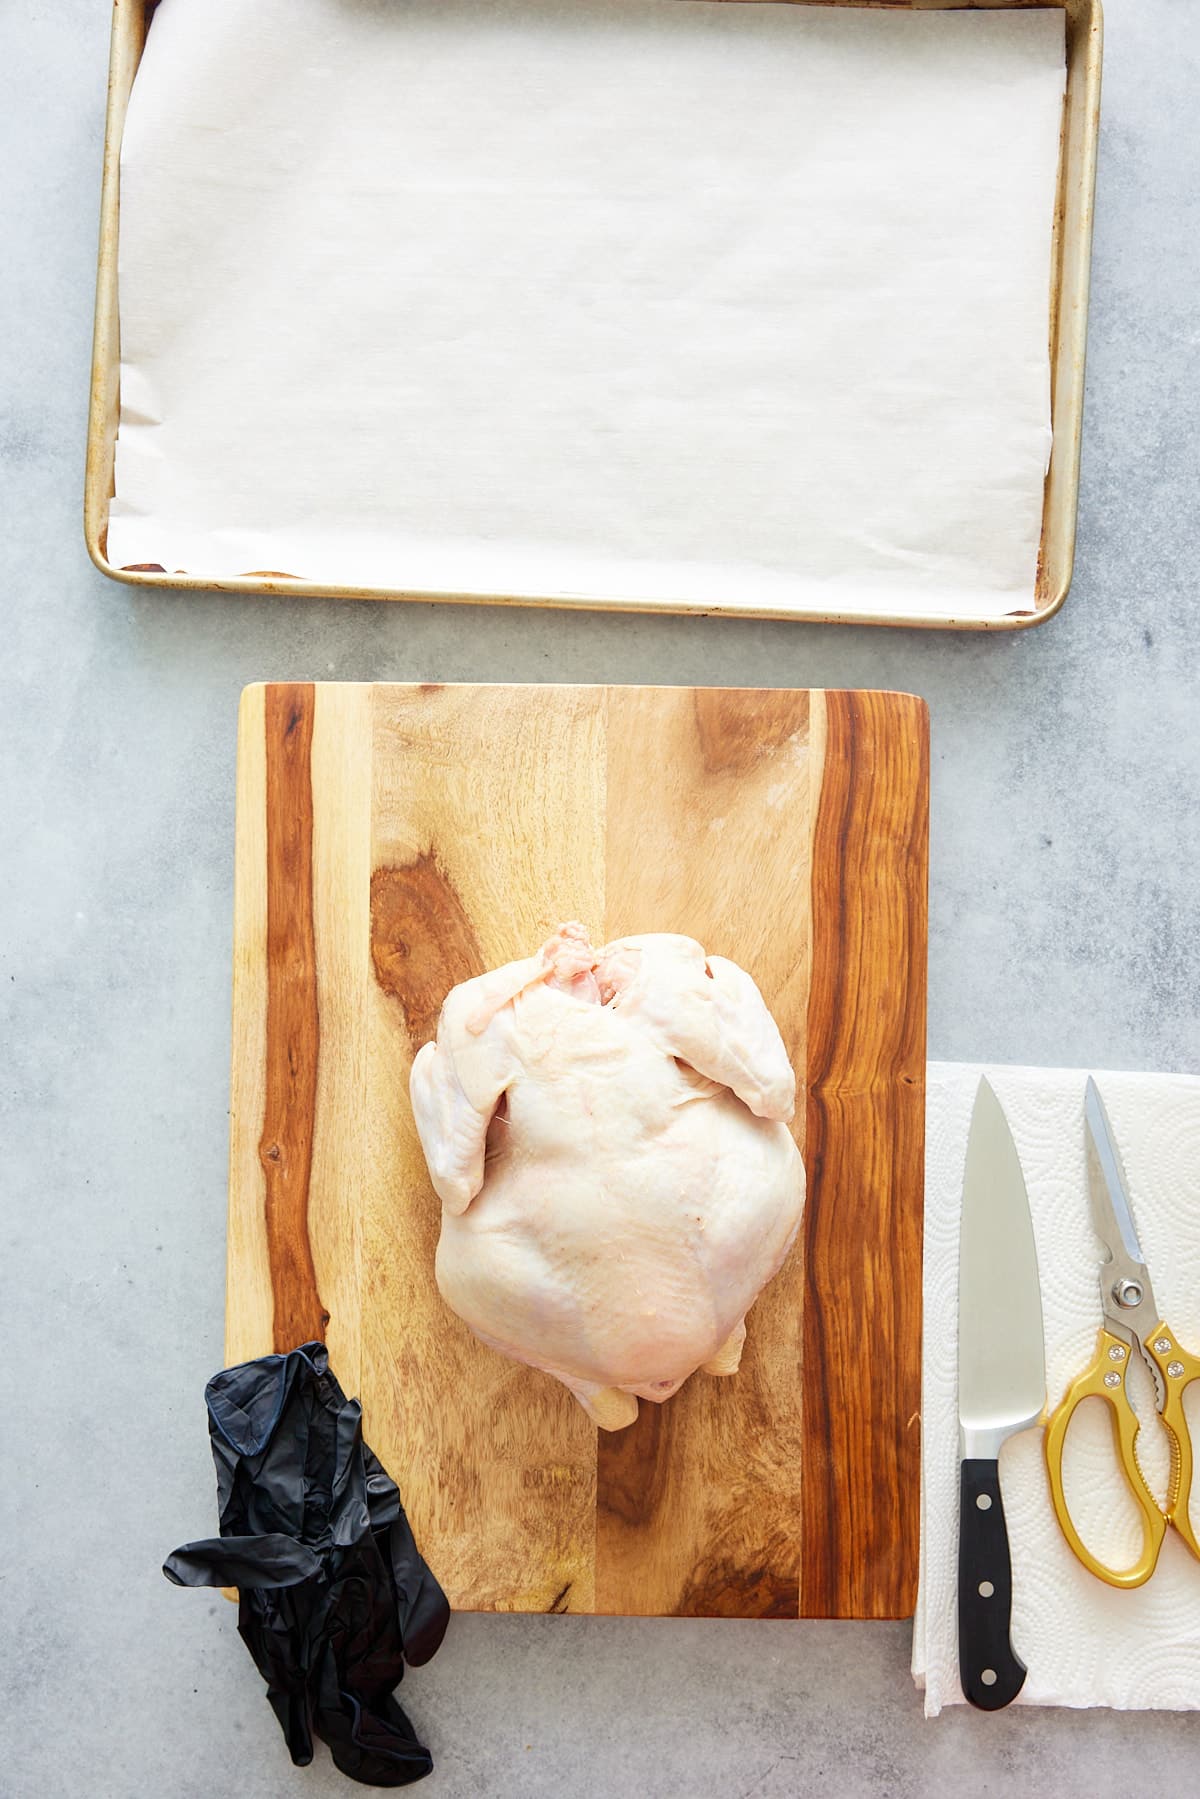 raw chicken and tools needed to cut the chicken, like gloves, knife, kitchen shears